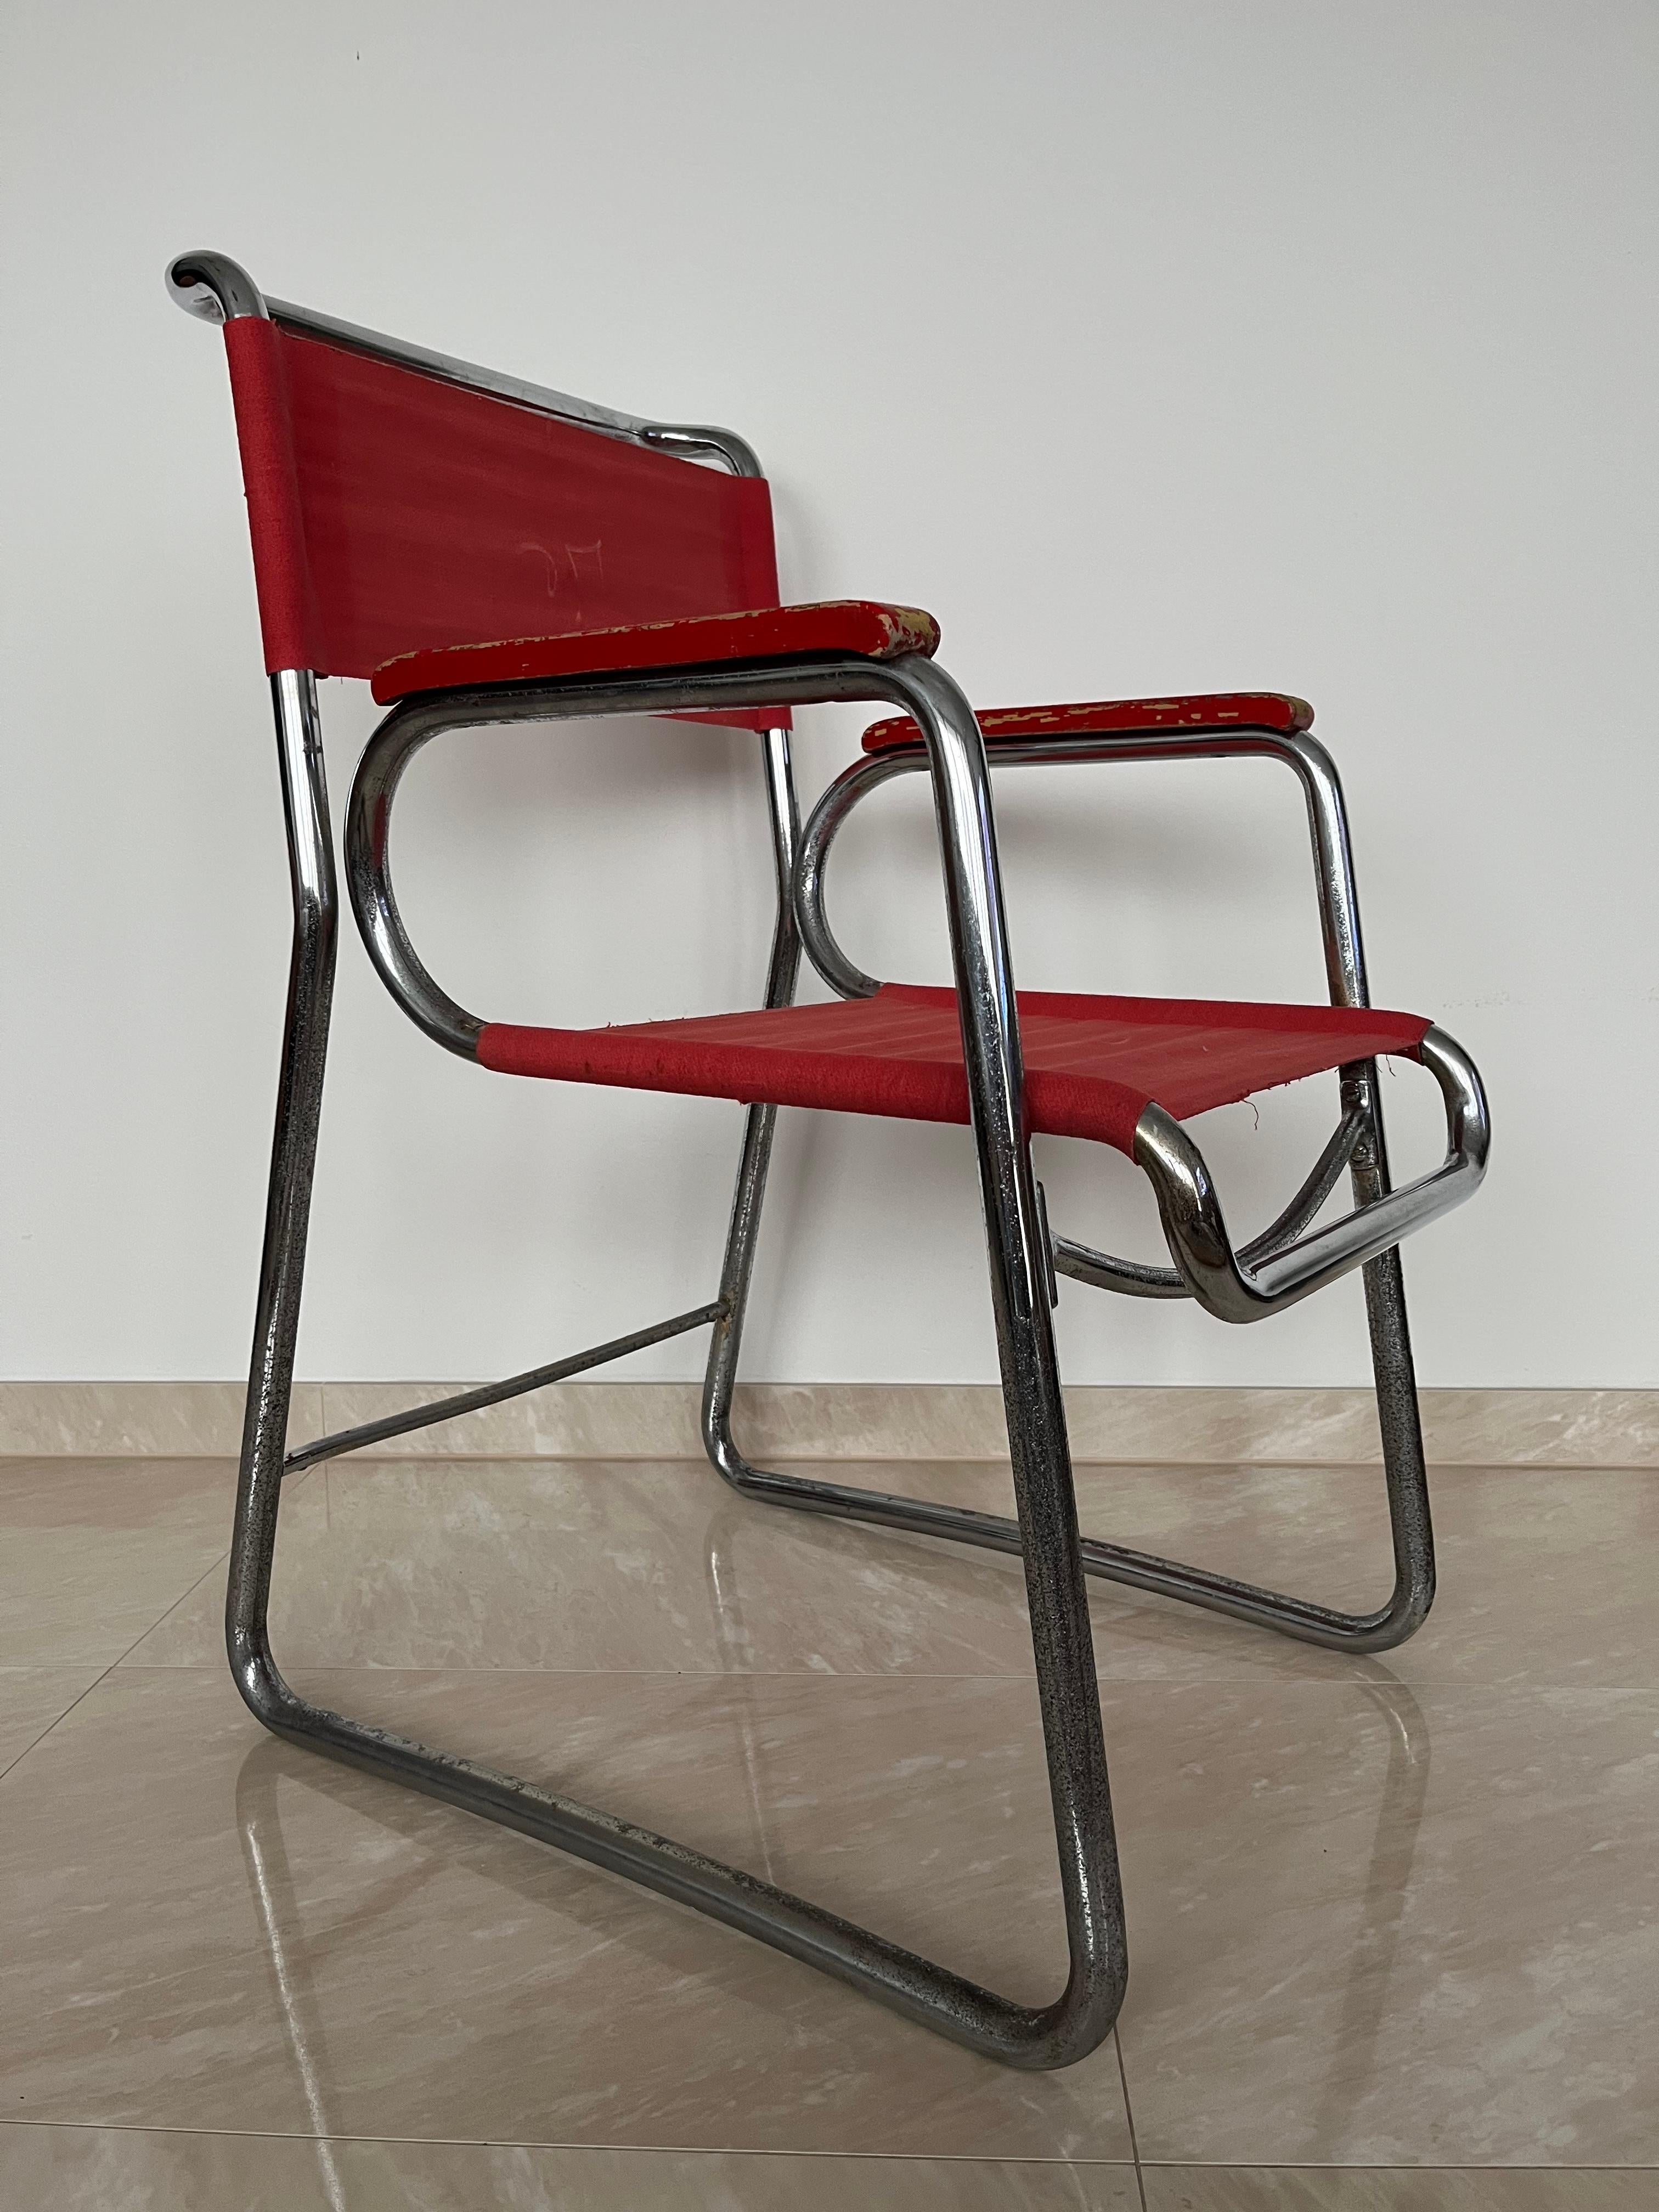 Extremely RARE bauhaus chrome massive chair by Frantisek Berger - 1930s For Sale 3